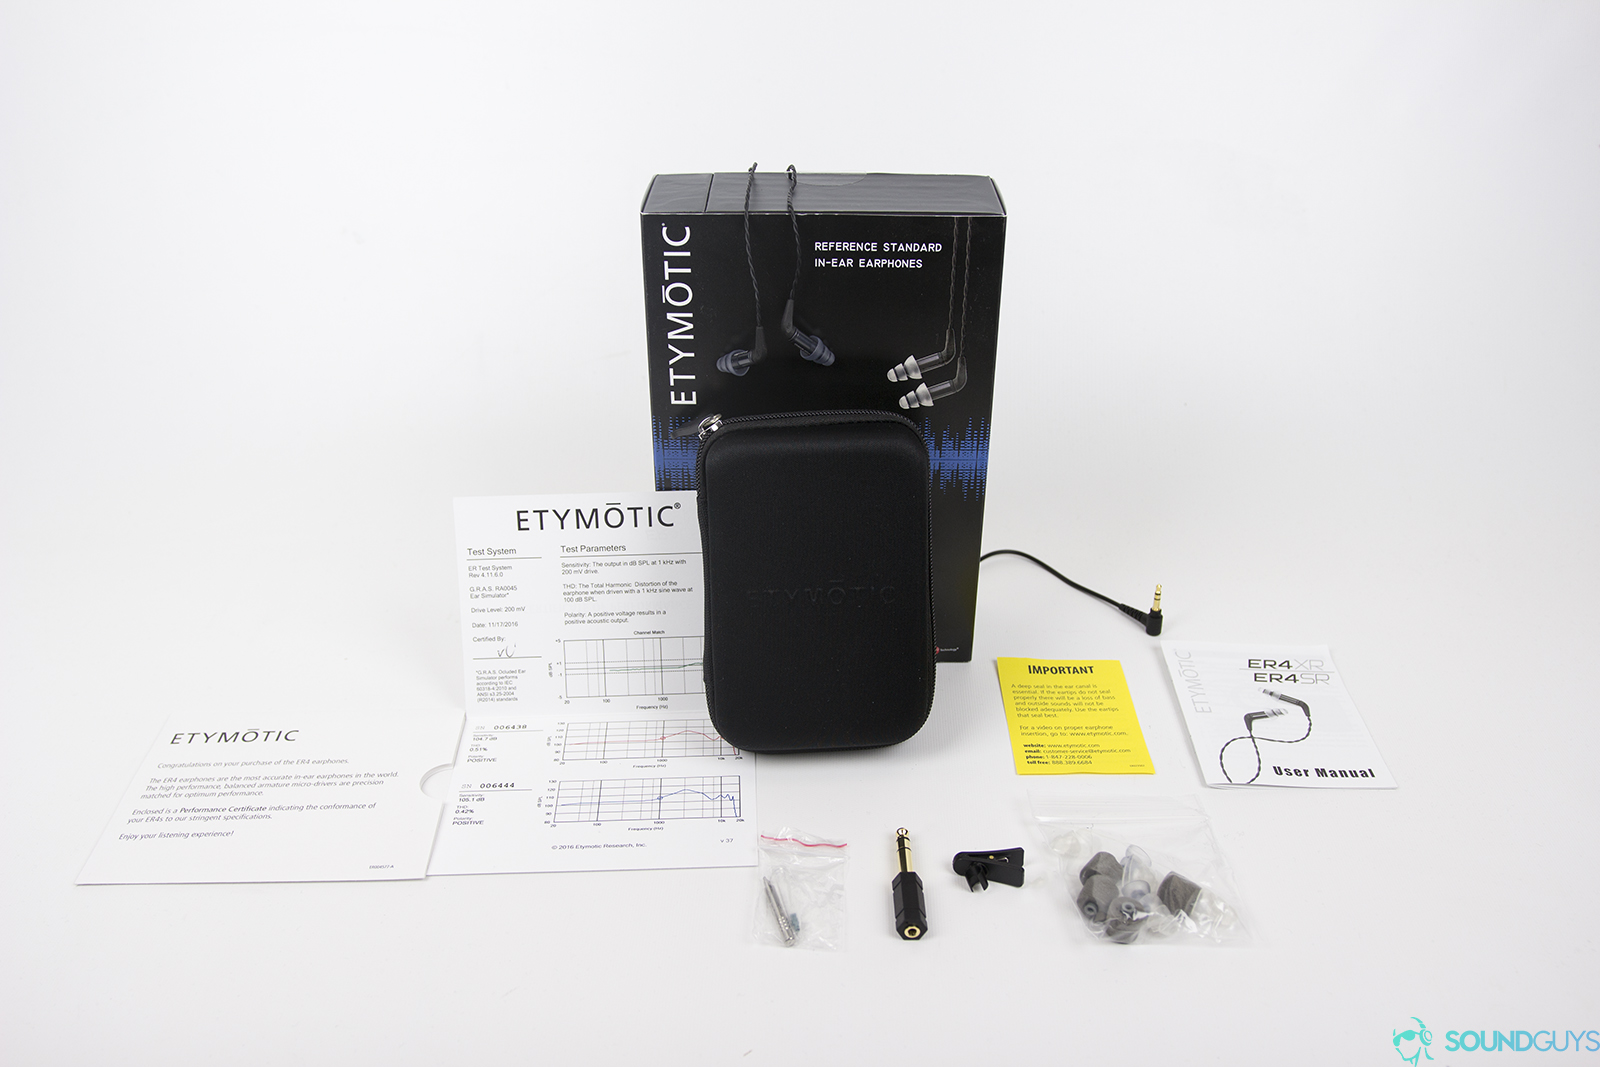 Photo of the Etymotic ER4SR packaging all laid out against a white table.